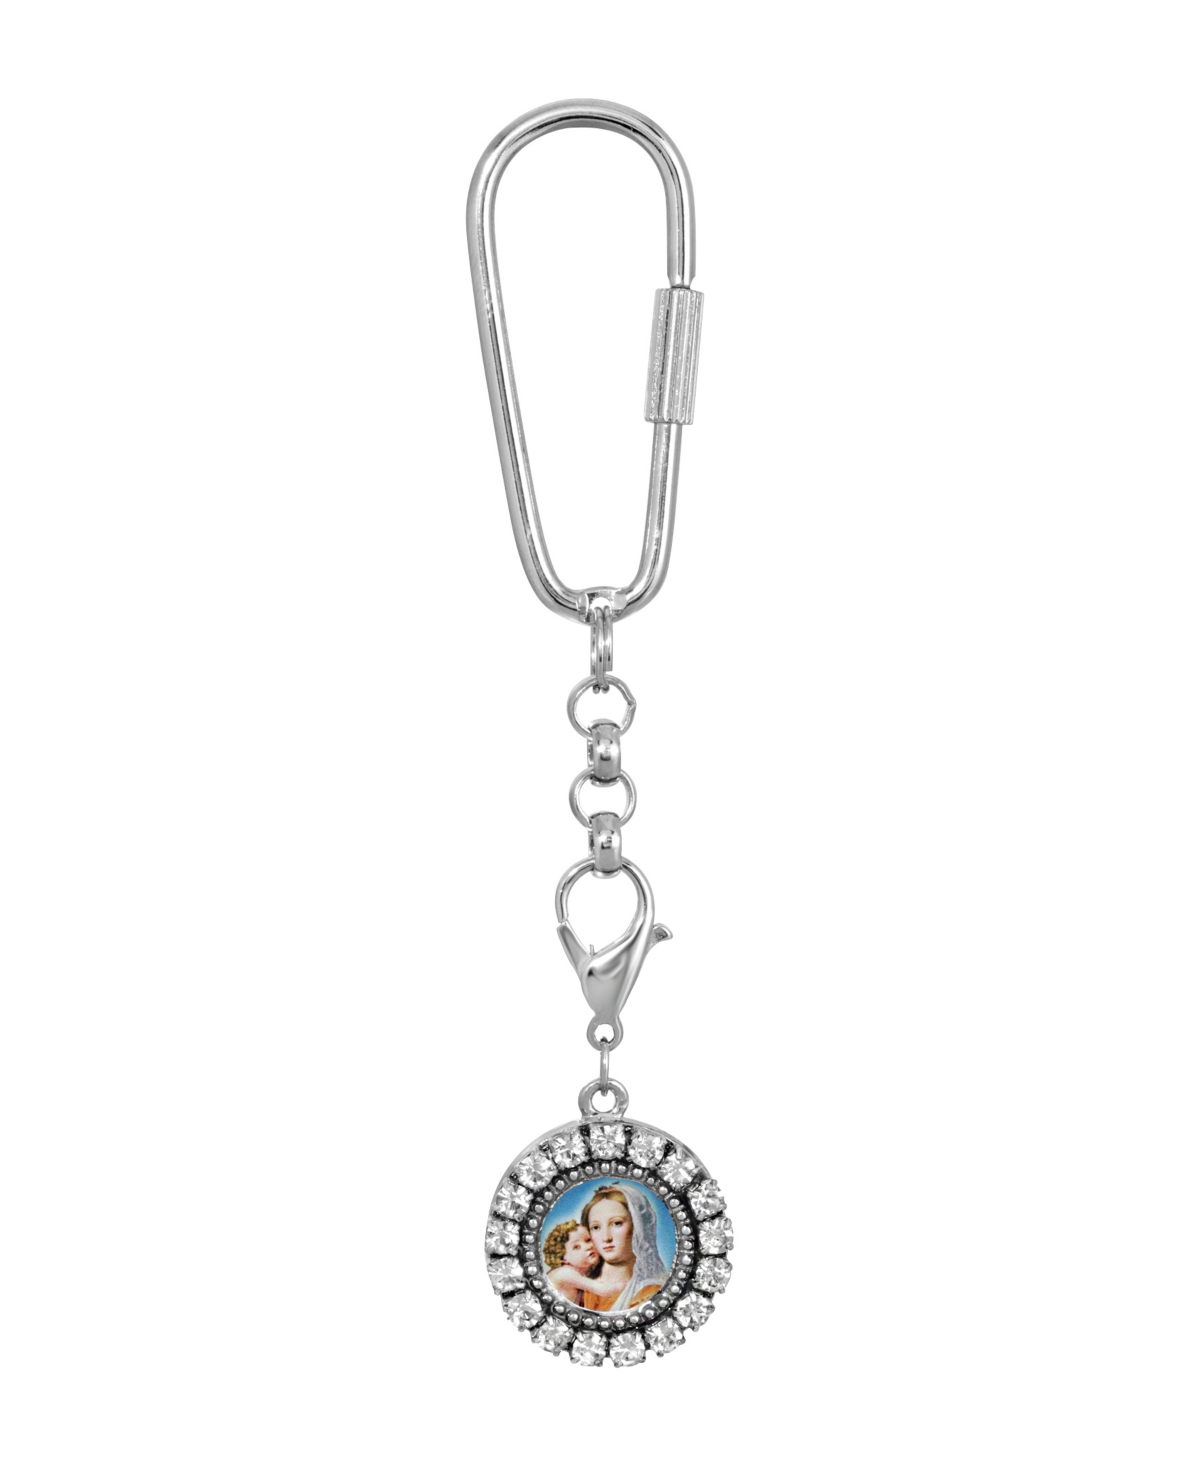 Silver-Tone Mary and Child Charm Key Fob - White